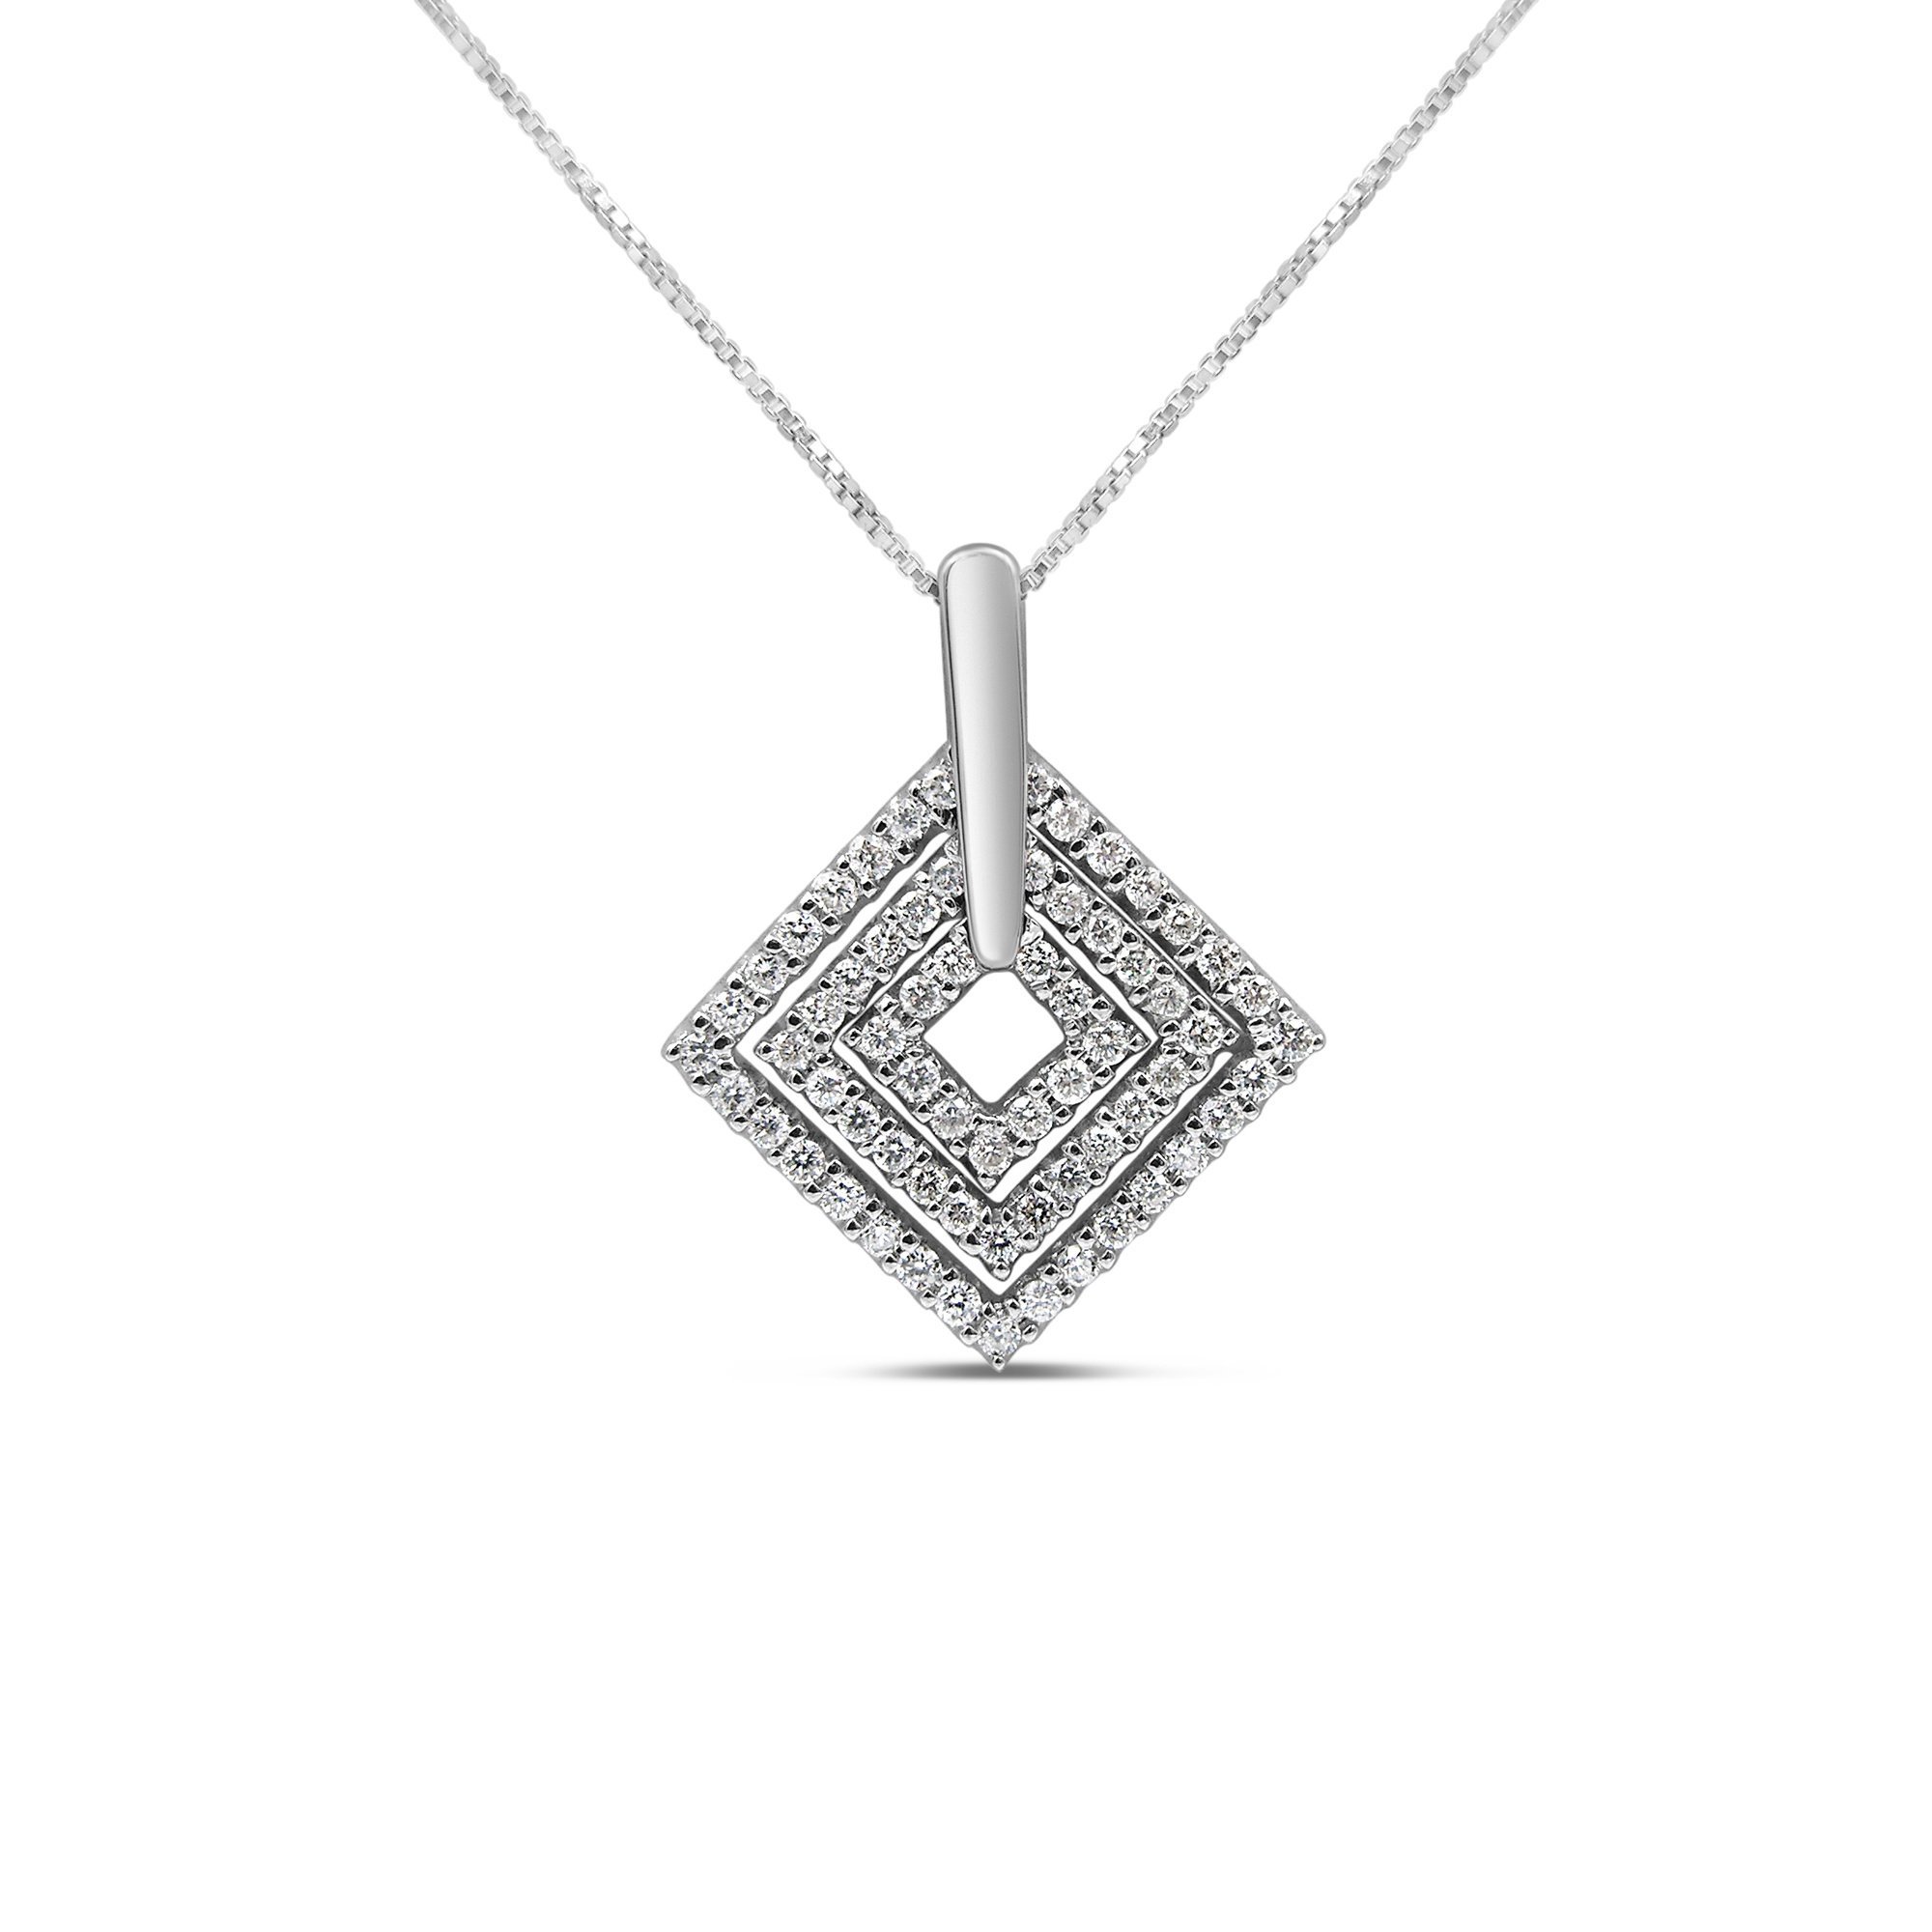 18kt white gold pendant with 0.43 ct diamonds